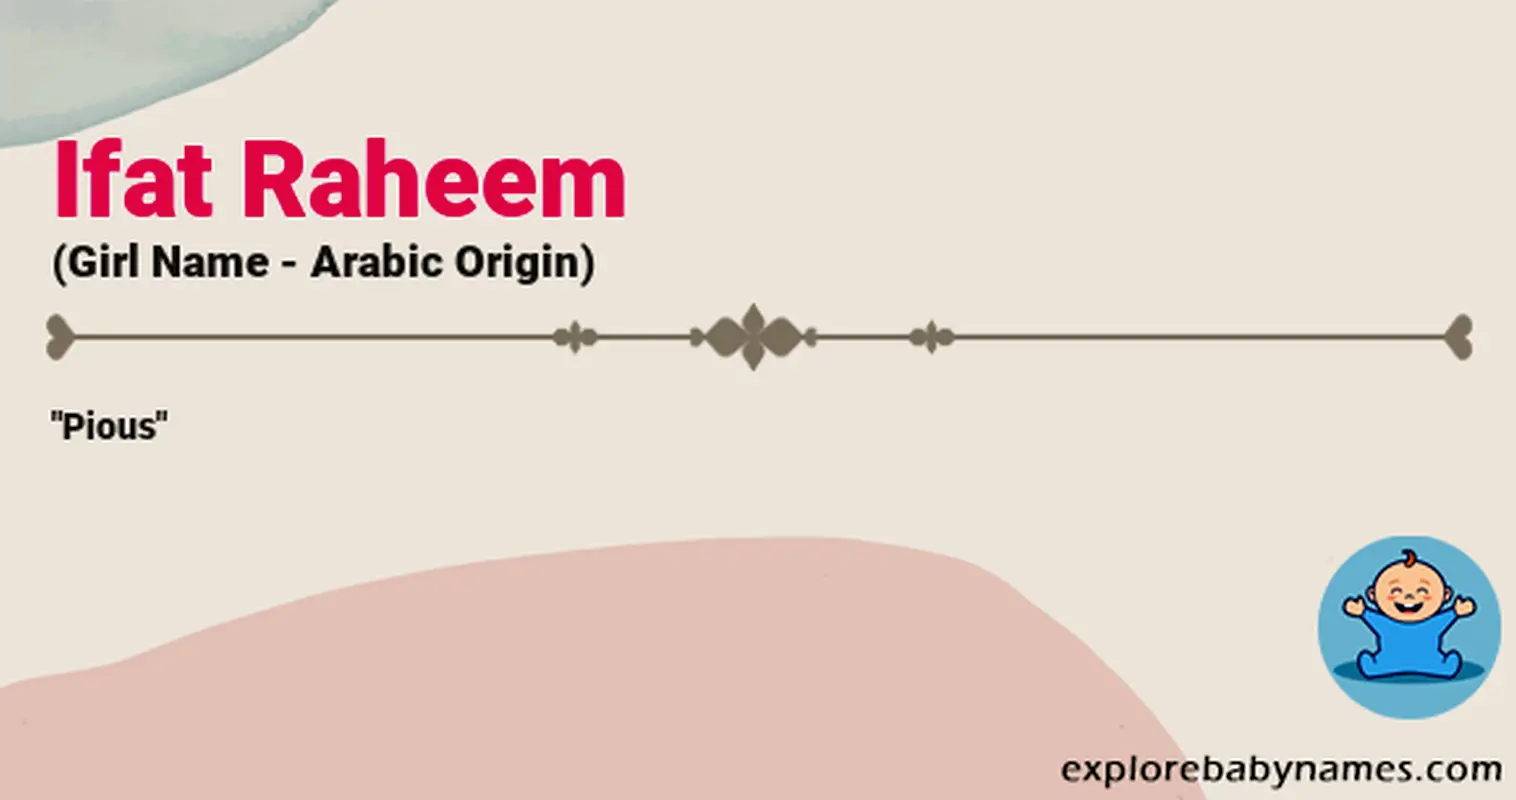 Meaning of Ifat Raheem